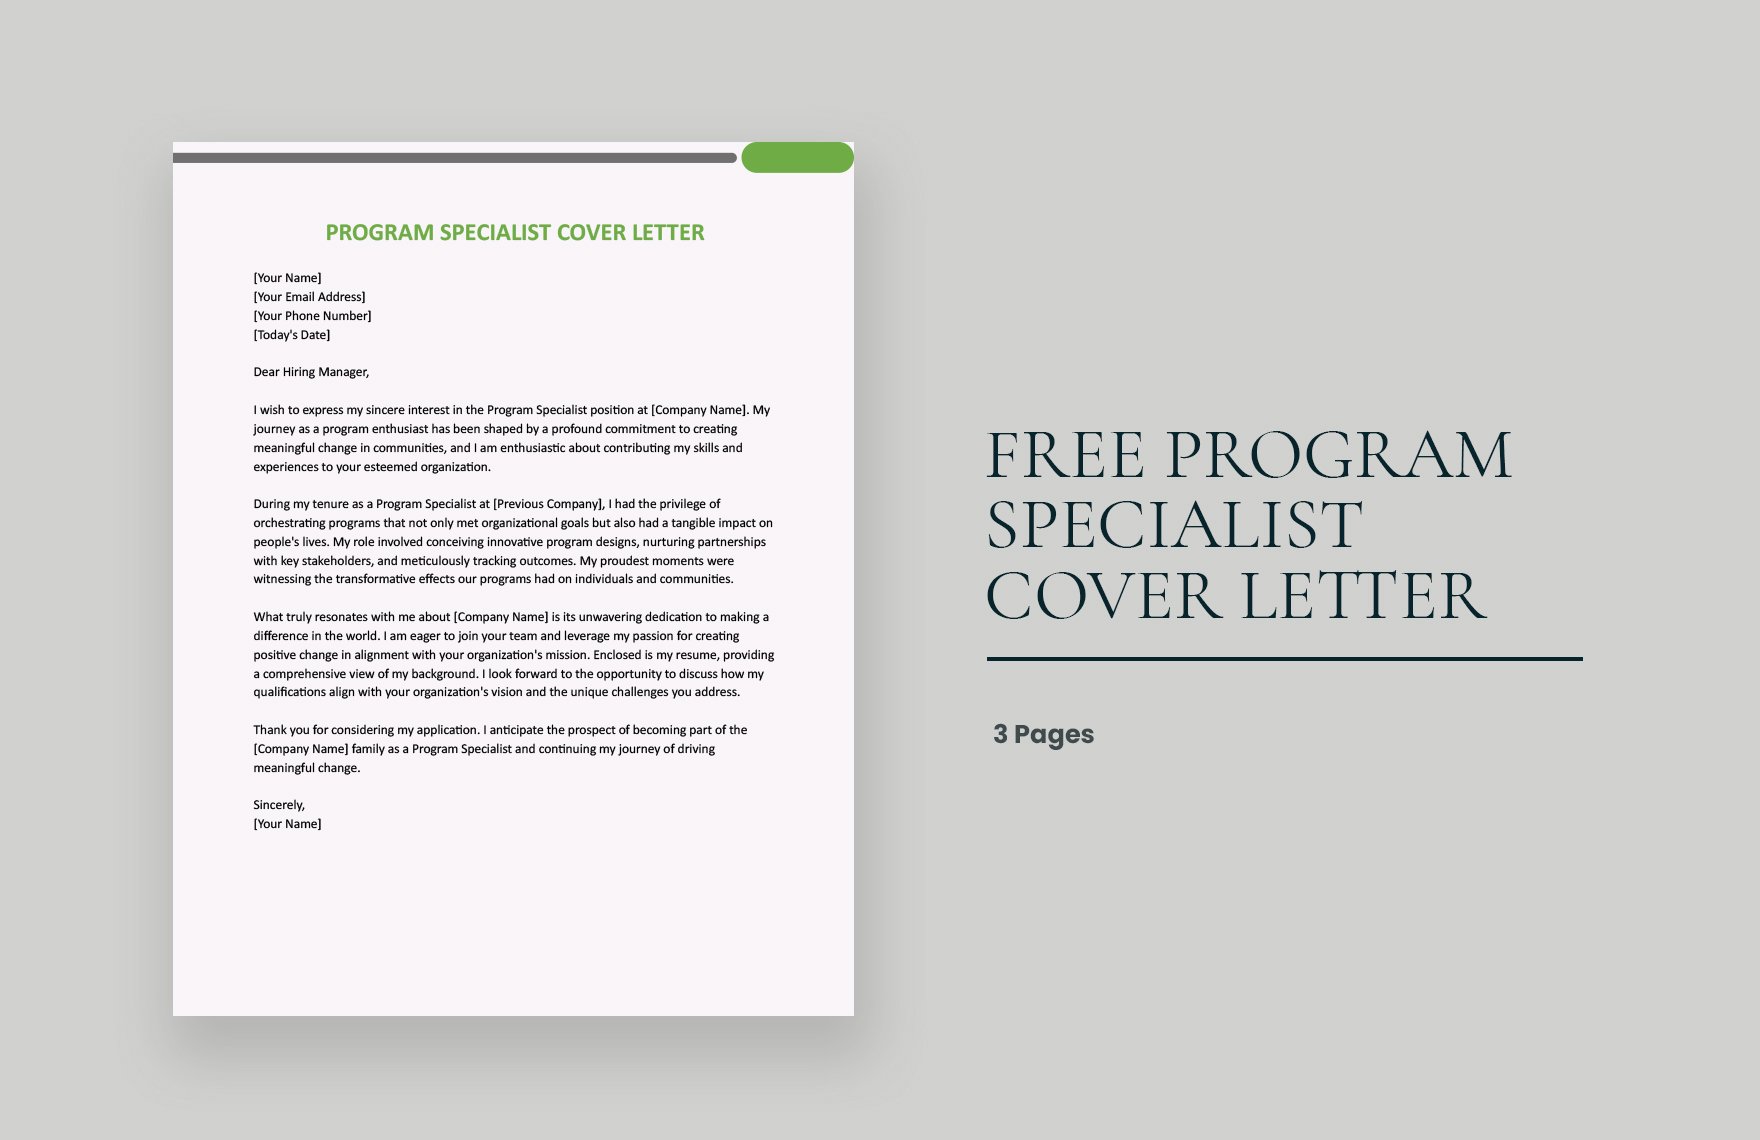 Program Specialist Cover Letter in Word, Google Docs